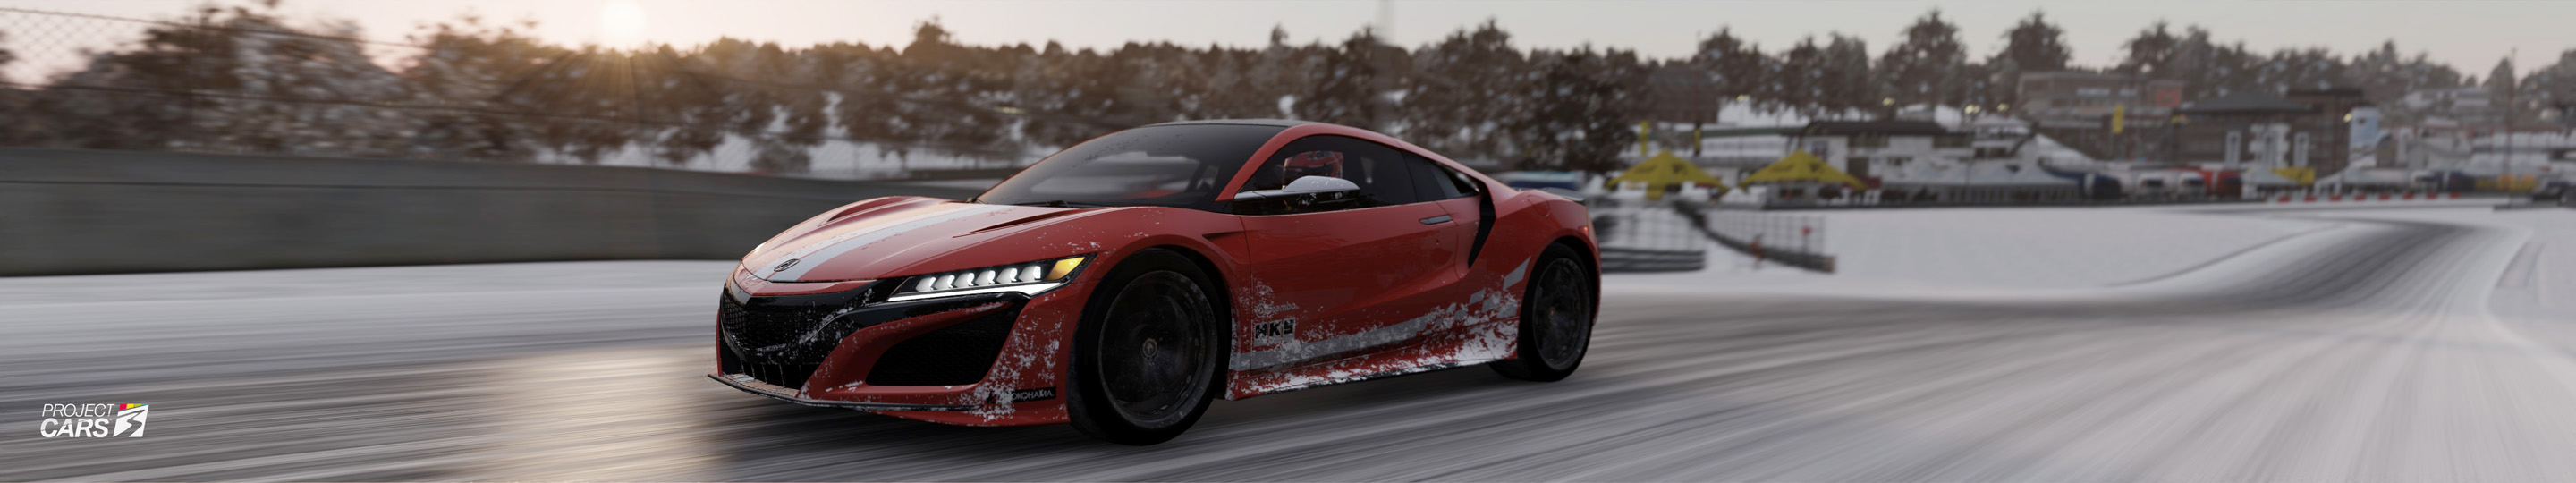 1 PROJECT CARS 3 ACURA NSX 2020 at ZOLDER Snow copy.jpg